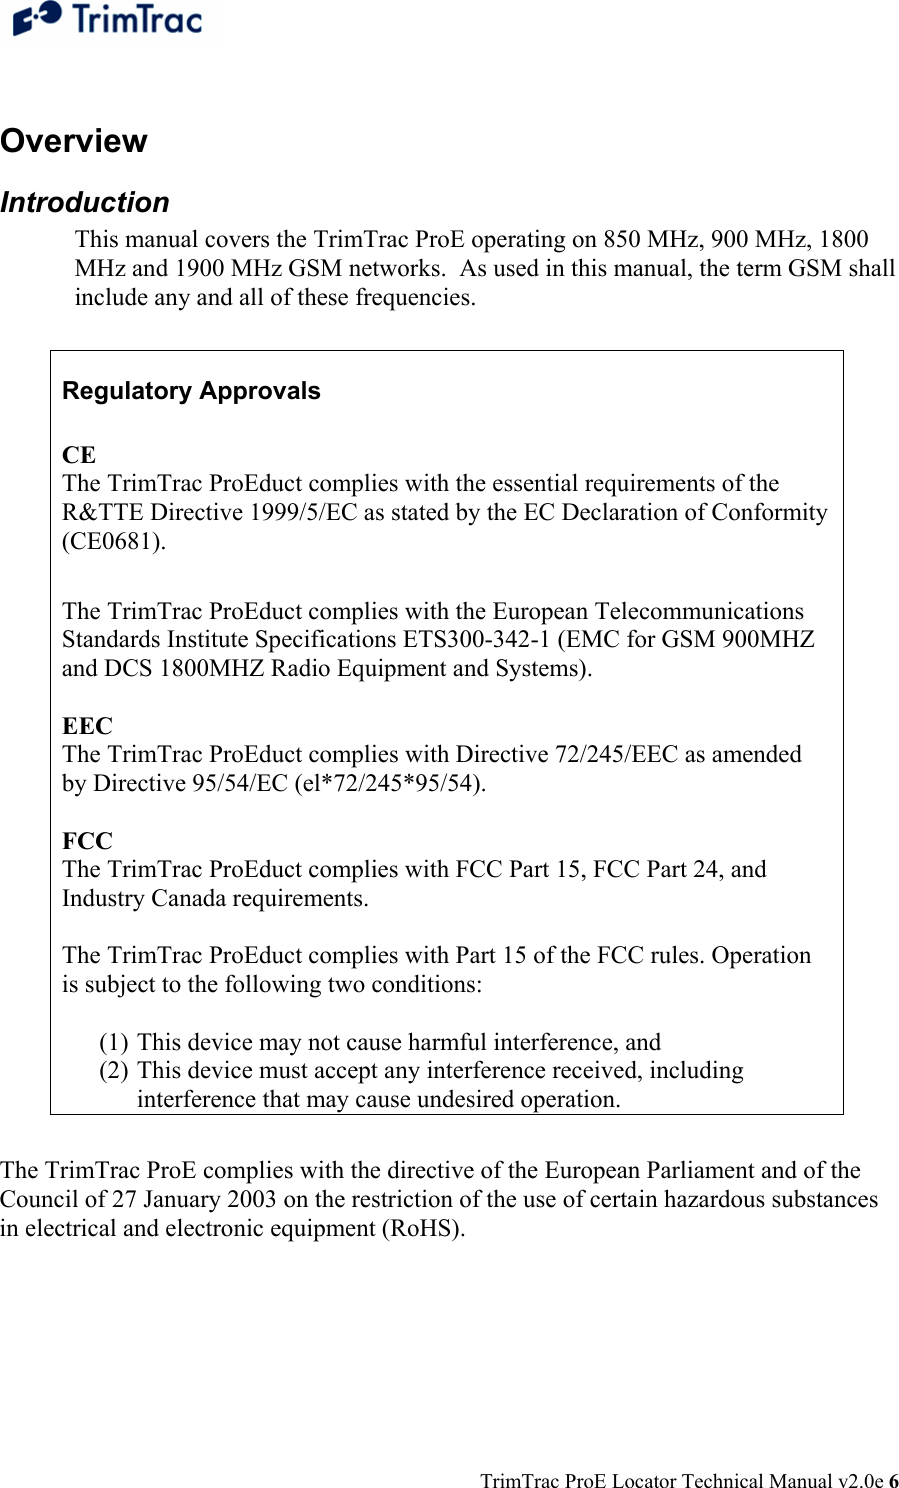  TrimTrac ProE Locator Technical Manual v2.0e 6  Overview Introduction This manual covers the TrimTrac ProE operating on 850 MHz, 900 MHz, 1800 MHz and 1900 MHz GSM networks.  As used in this manual, the term GSM shall include any and all of these frequencies.  Regulatory Approvals  CE  The TrimTrac ProEduct complies with the essential requirements of the R&amp;TTE Directive 1999/5/EC as stated by the EC Declaration of Conformity (CE0681).   The TrimTrac ProEduct complies with the European Telecommunications Standards Institute Specifications ETS300-342-1 (EMC for GSM 900MHZ and DCS 1800MHZ Radio Equipment and Systems).   EEC  The TrimTrac ProEduct complies with Directive 72/245/EEC as amended by Directive 95/54/EC (el*72/245*95/54).   FCC  The TrimTrac ProEduct complies with FCC Part 15, FCC Part 24, and Industry Canada requirements.   The TrimTrac ProEduct complies with Part 15 of the FCC rules. Operation is subject to the following two conditions:   (1) This device may not cause harmful interference, and  (2) This device must accept any interference received, including interference that may cause undesired operation.  The TrimTrac ProE complies with the directive of the European Parliament and of the Council of 27 January 2003 on the restriction of the use of certain hazardous substances in electrical and electronic equipment (RoHS). 